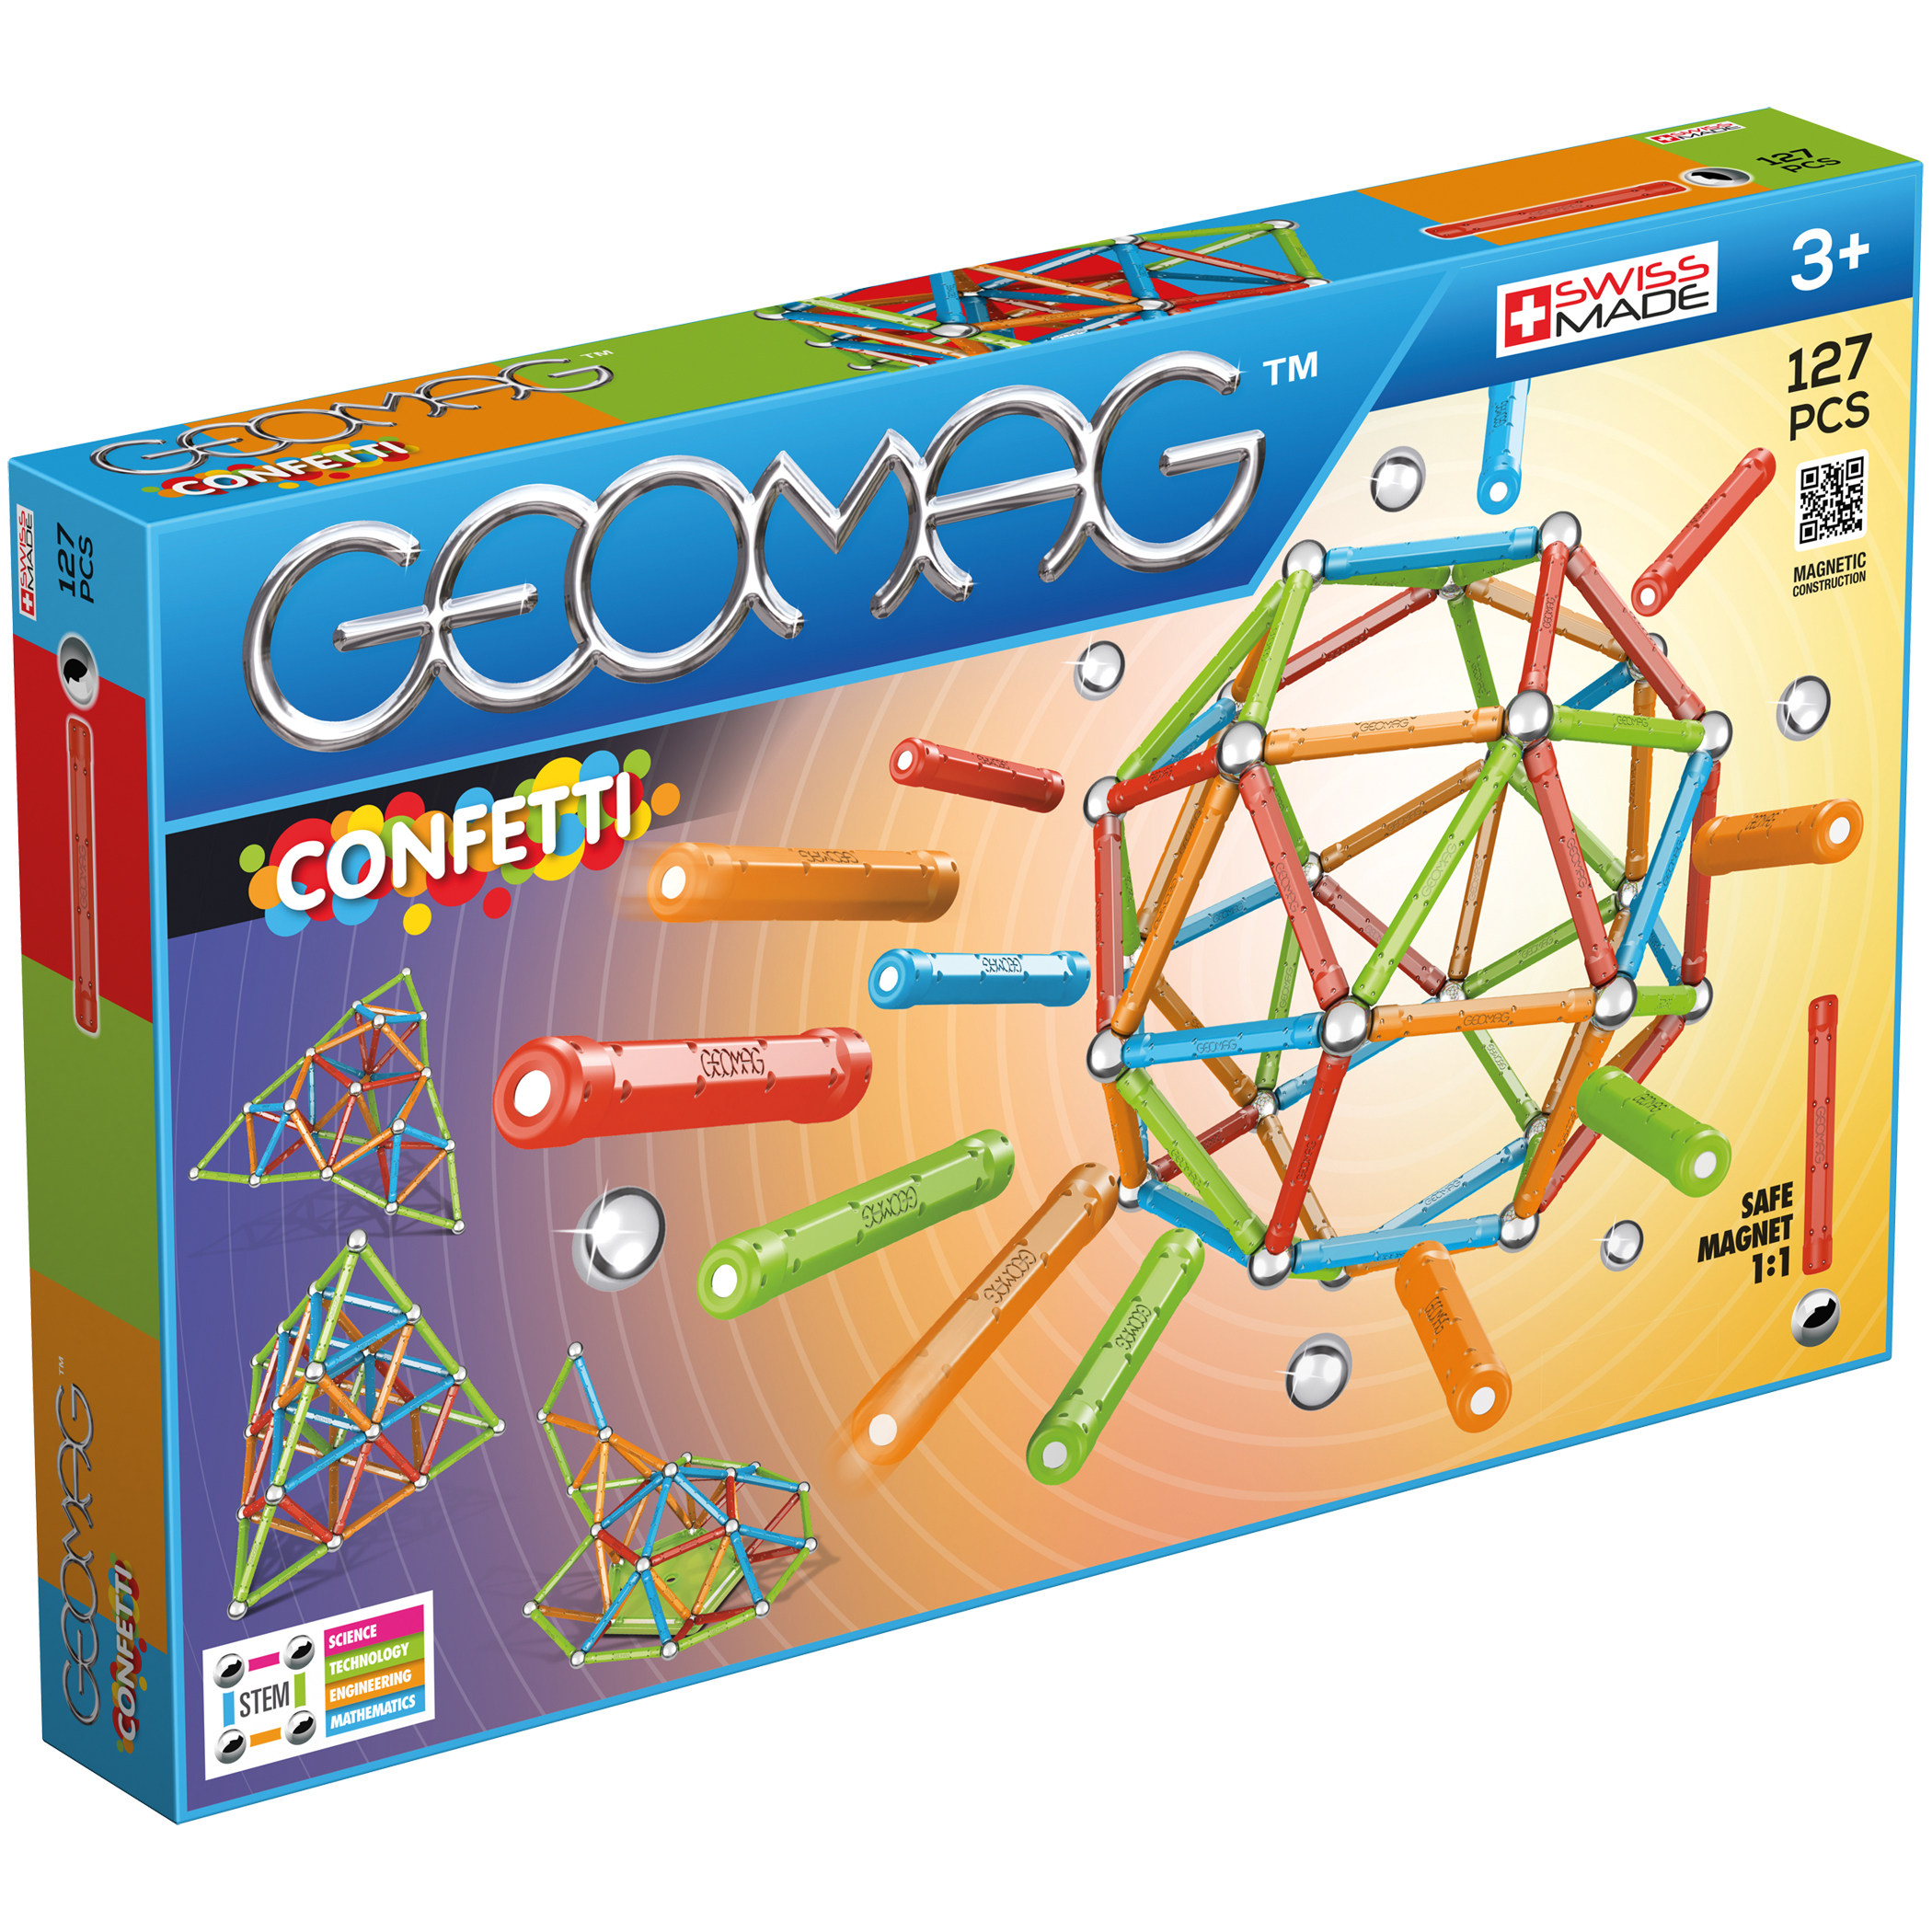 Geomag Geomag Confetti, Magnetic Rod and Ball Building Set, 127 Pieces